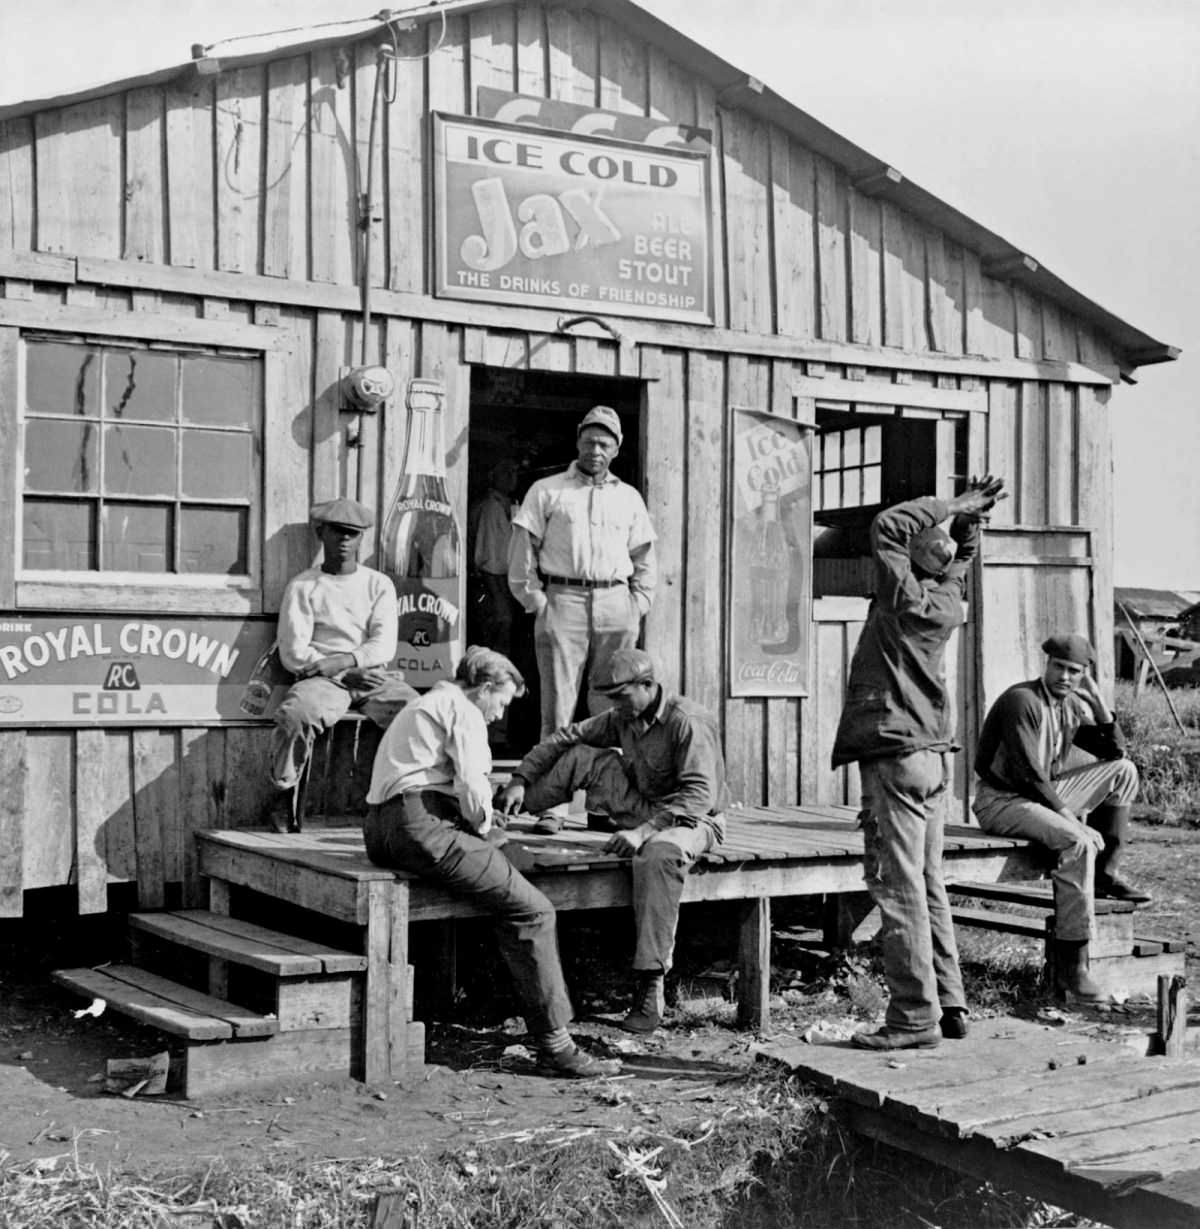 Migratory laborers playing checkers in front of a ‘jook joint’ during slack season for vegetable pickers. Belle Glade, Florida, 1941.